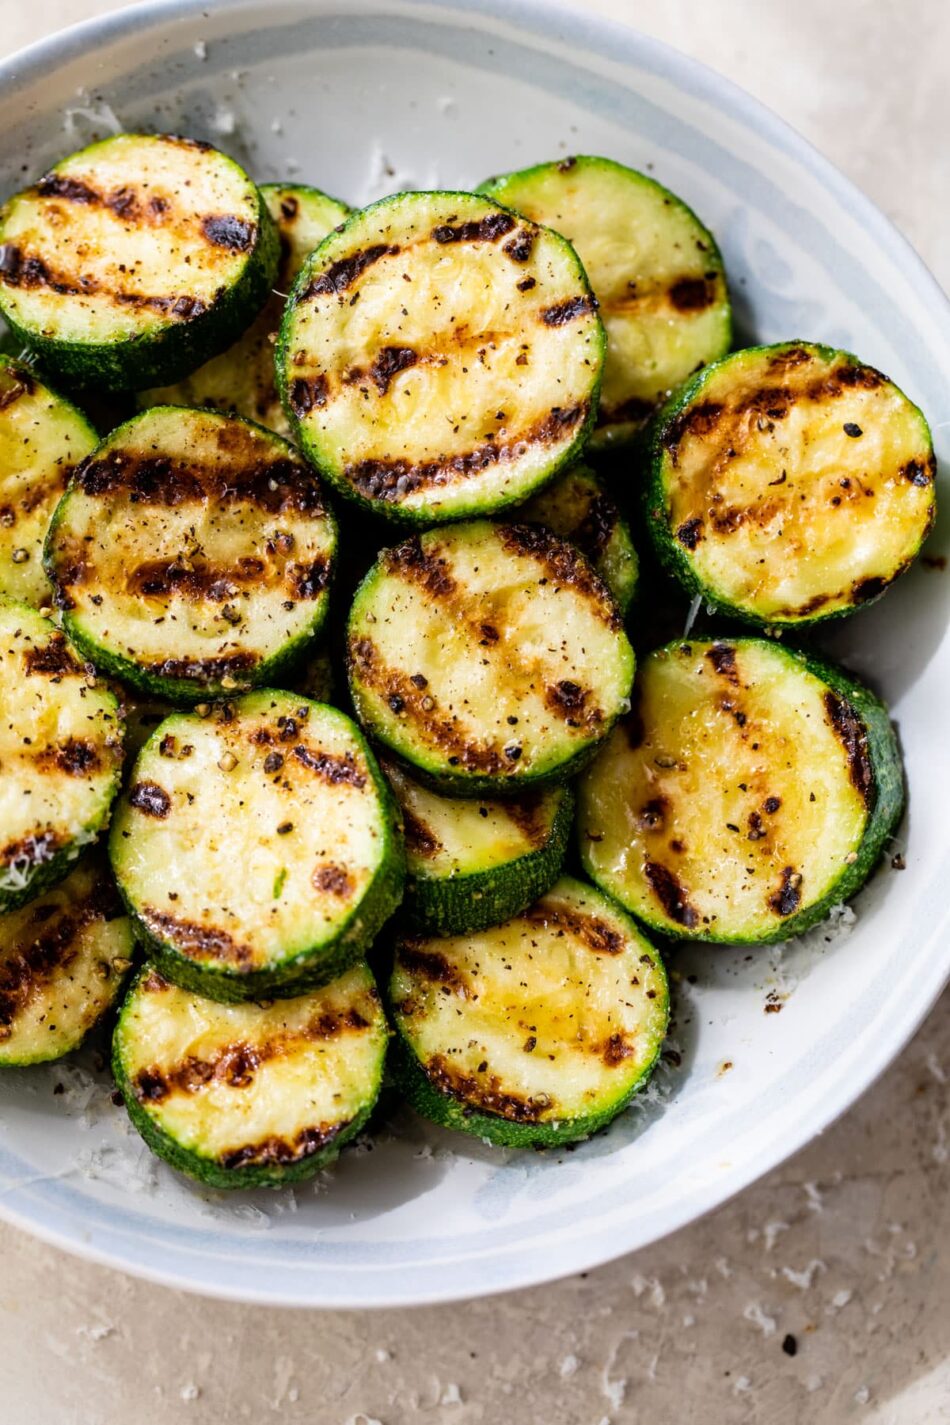 Grilled Zucchini – The Almond Eater